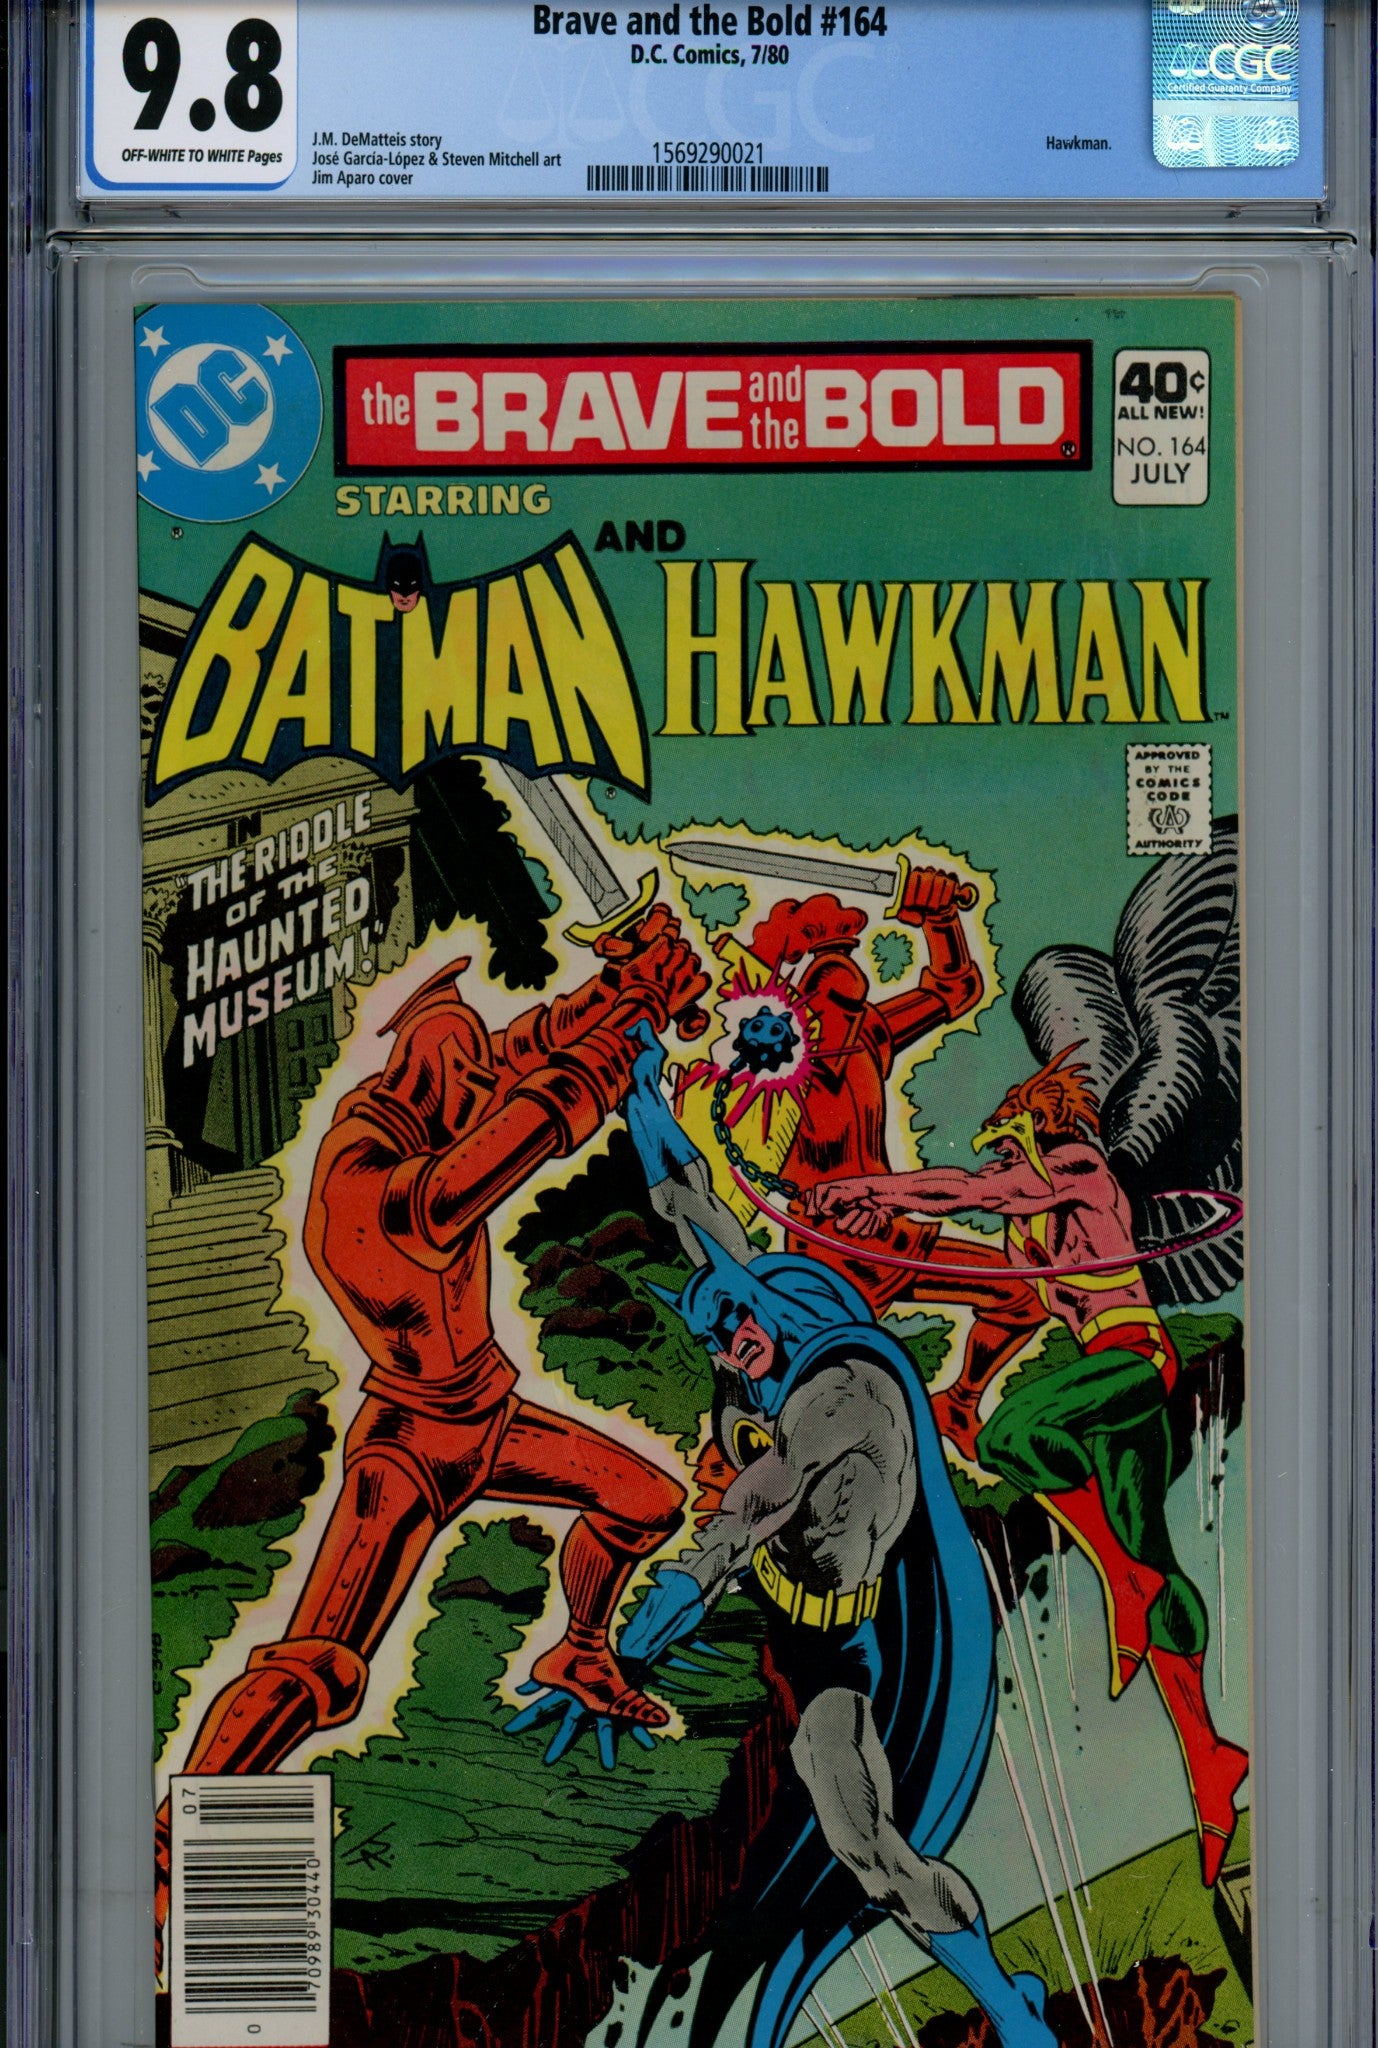 The Brave and the Bold Vol 1 164 CGC 9.8 (1980)